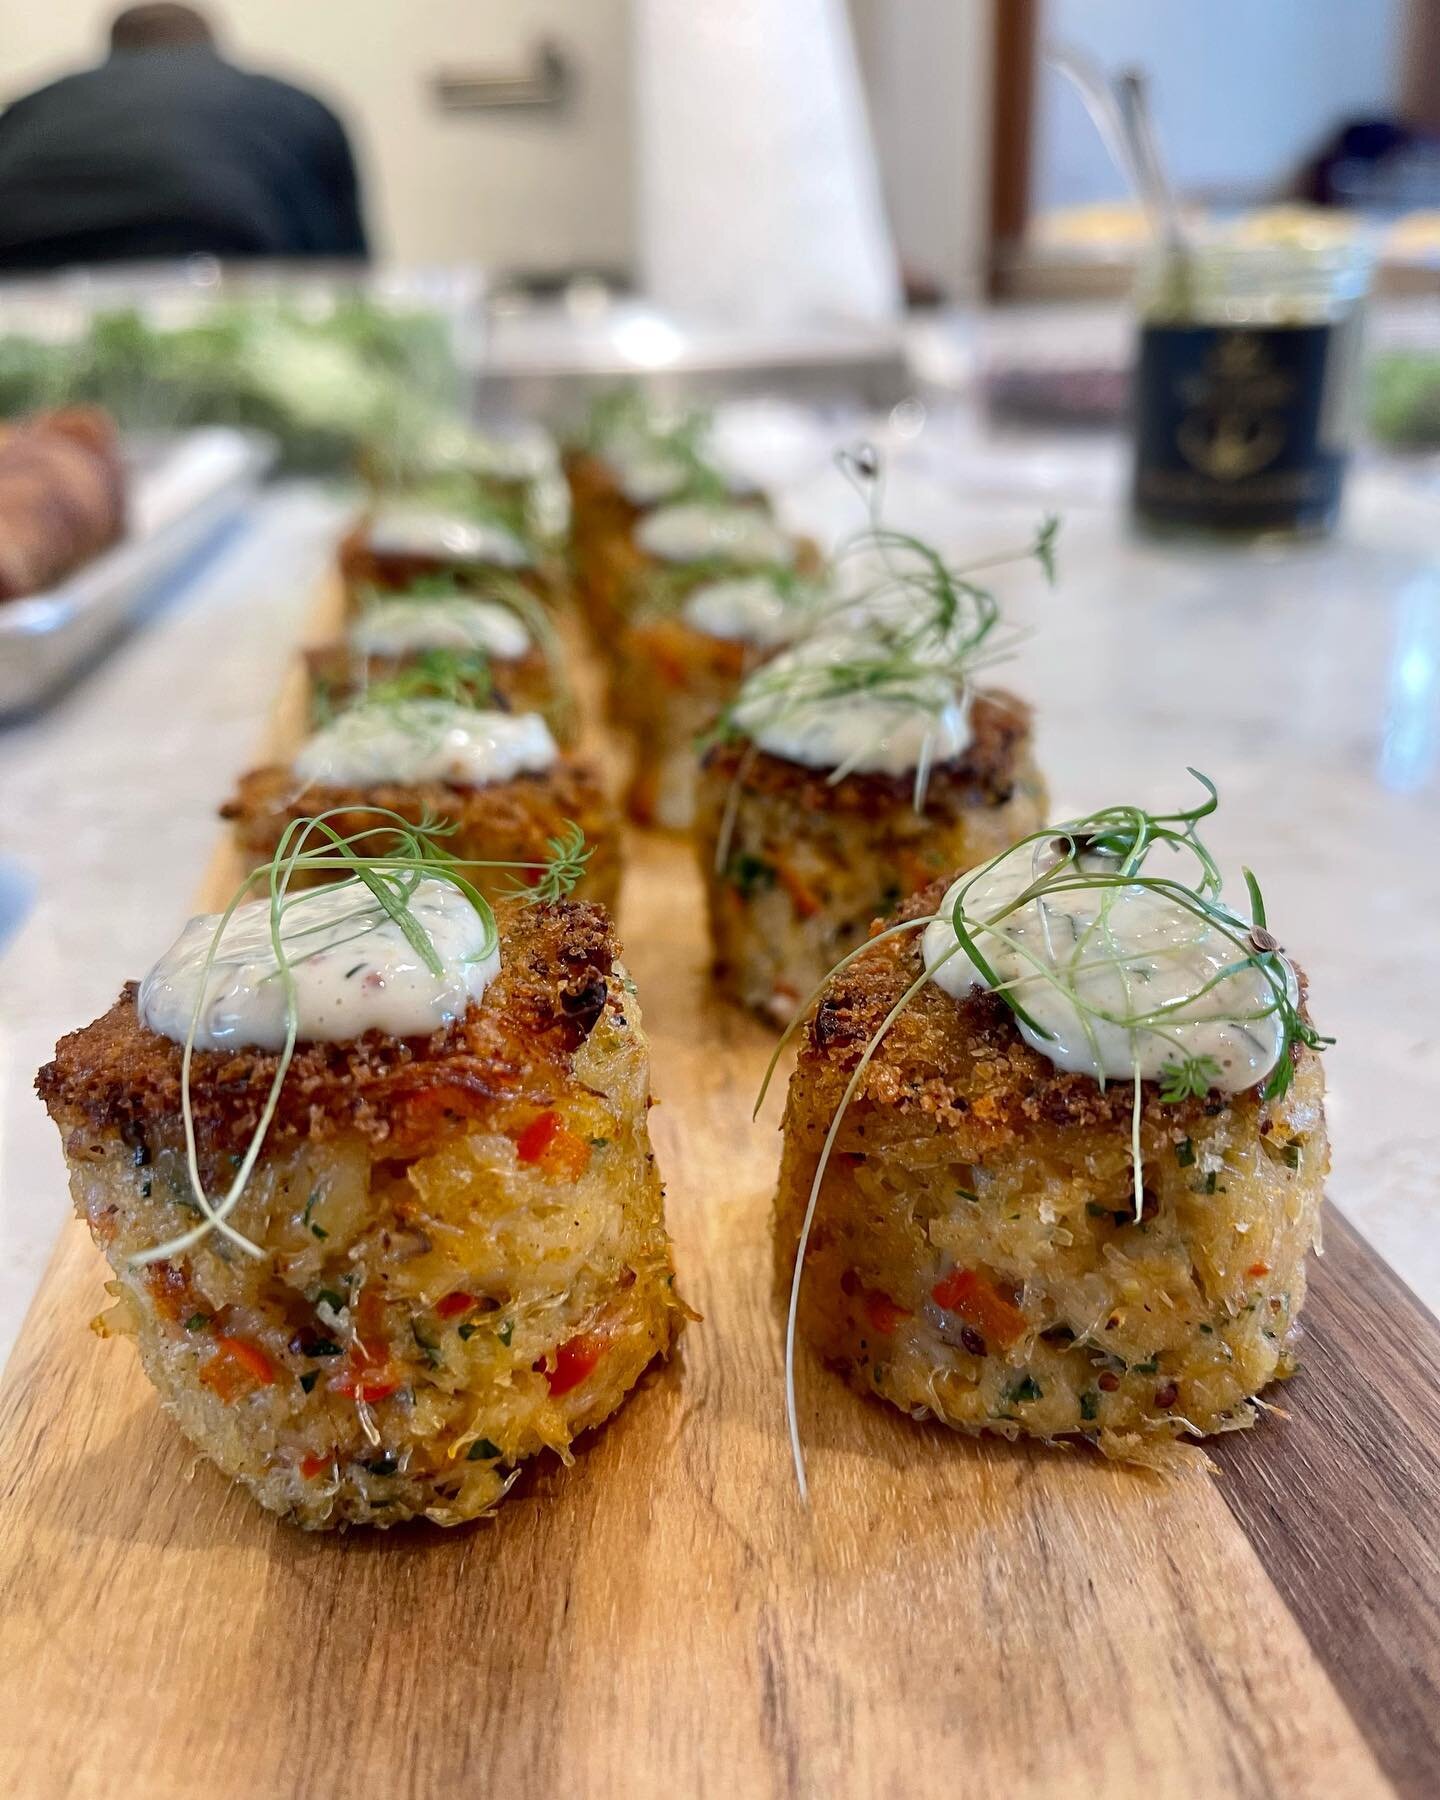 Dungeness crab cakes 🦀 the perfect bite for your cocktail hour! @finestatseavic always comes through with the best crab meat 😍 

#crab #crabcakes #dungenesscrab #gourmet #catering #saltspringisland #gulfislands #eatyyj #lulusapron